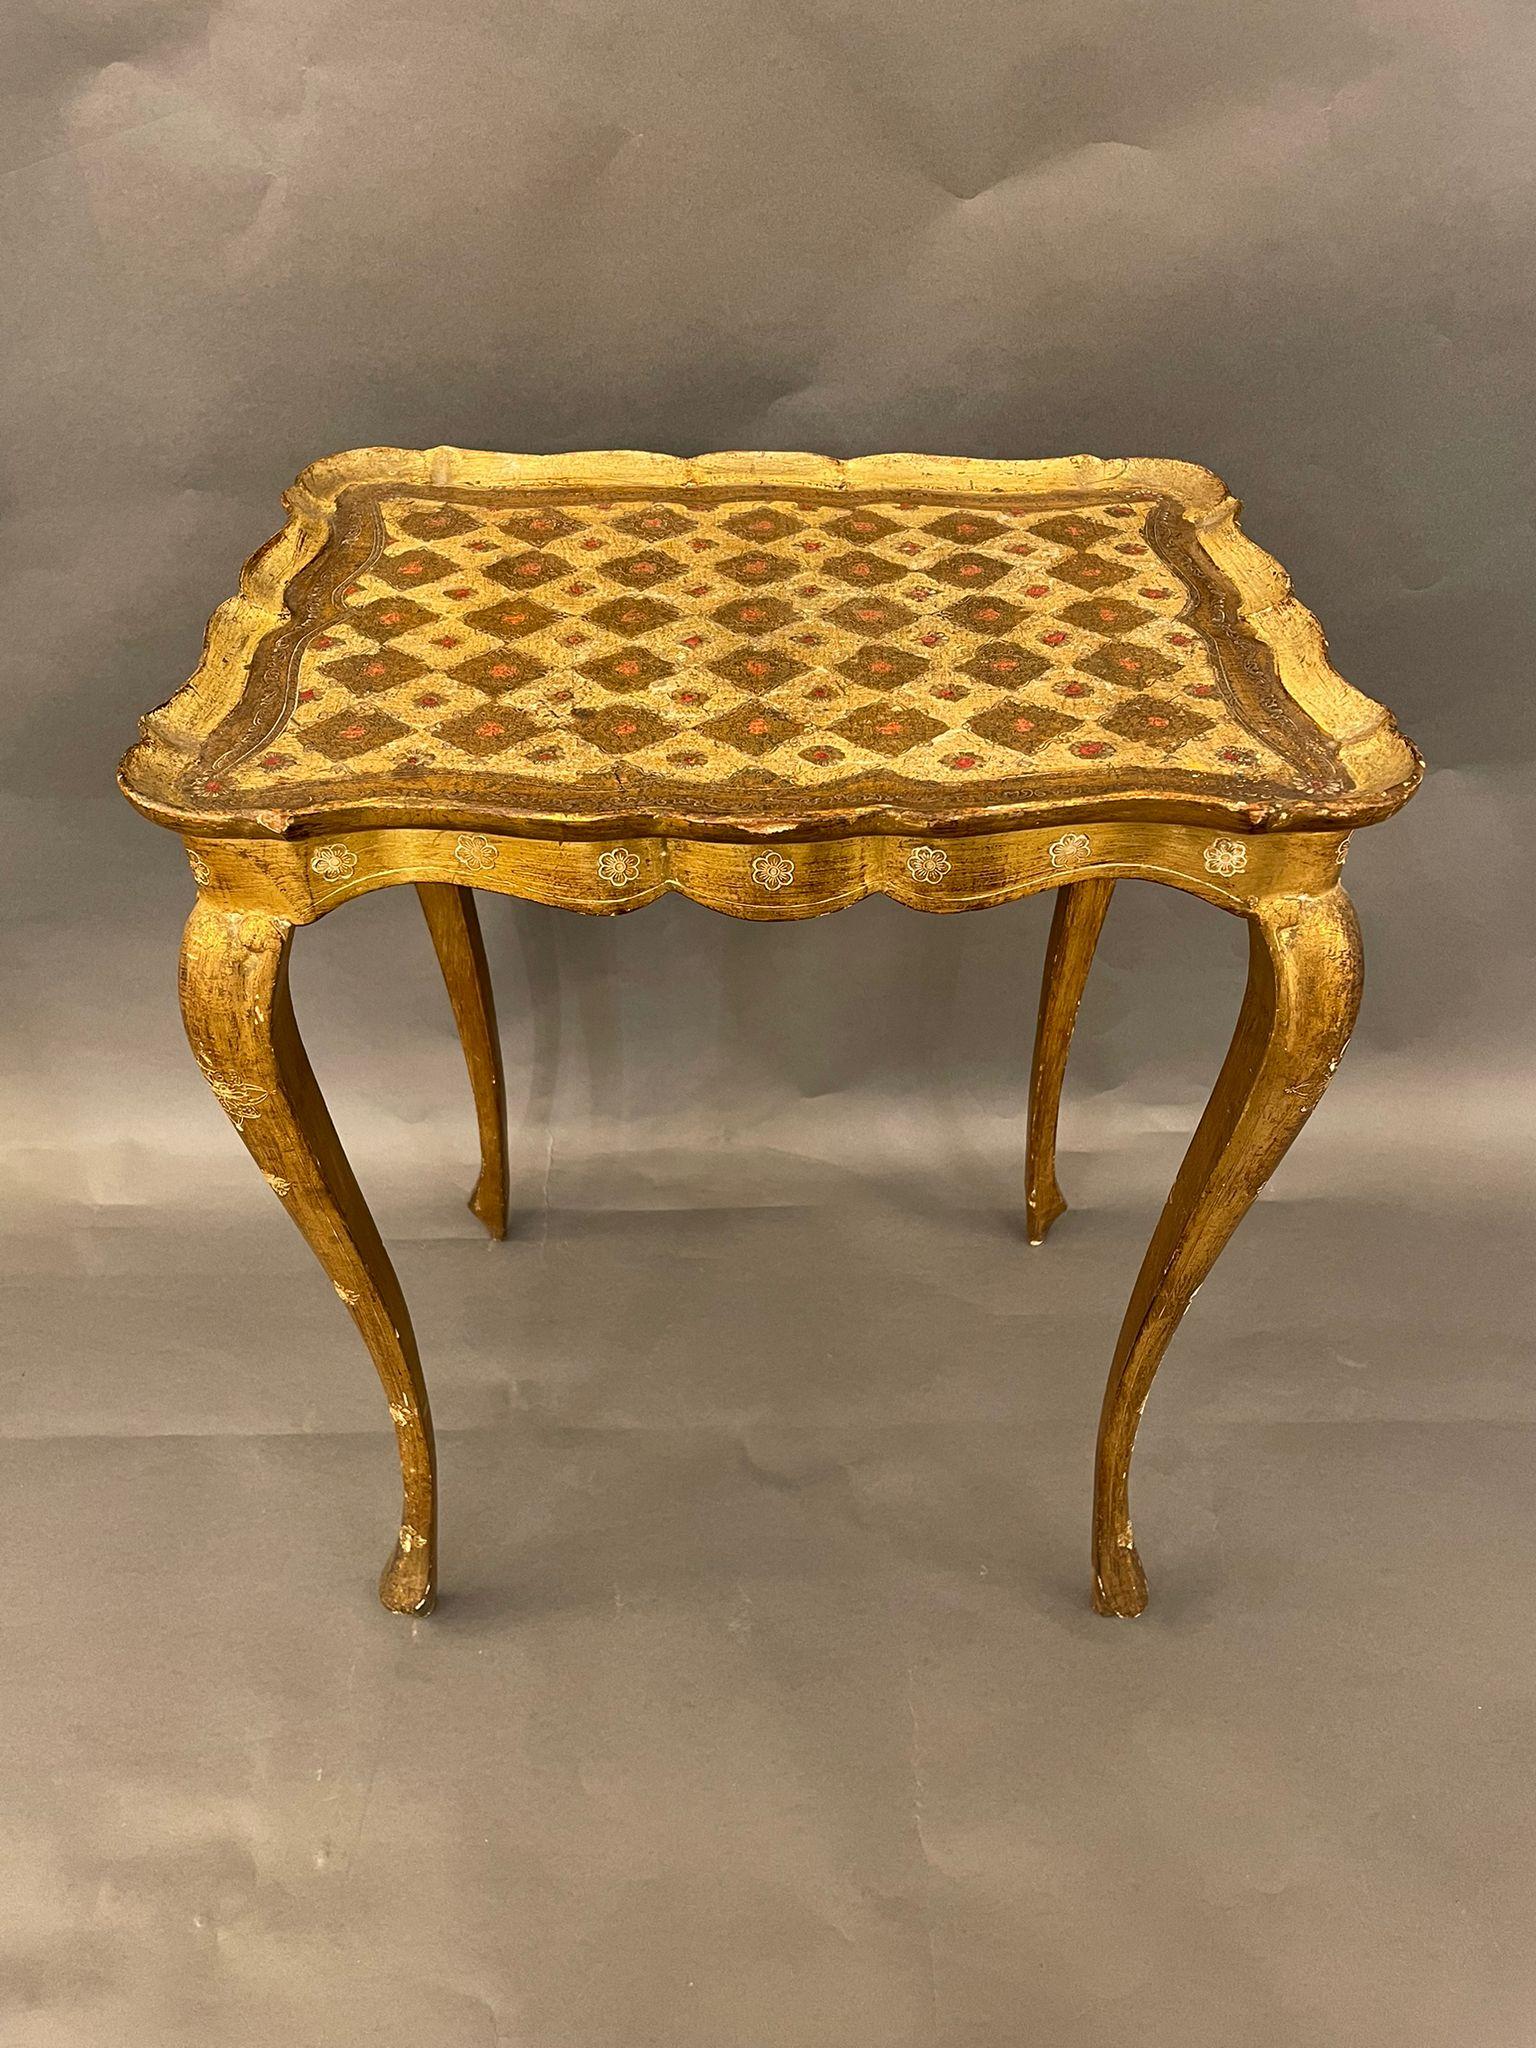 A highly decorative mid-century Italian florentine small side table made of gilt wood, in the style of Hollywood Recency, circa 1940s.